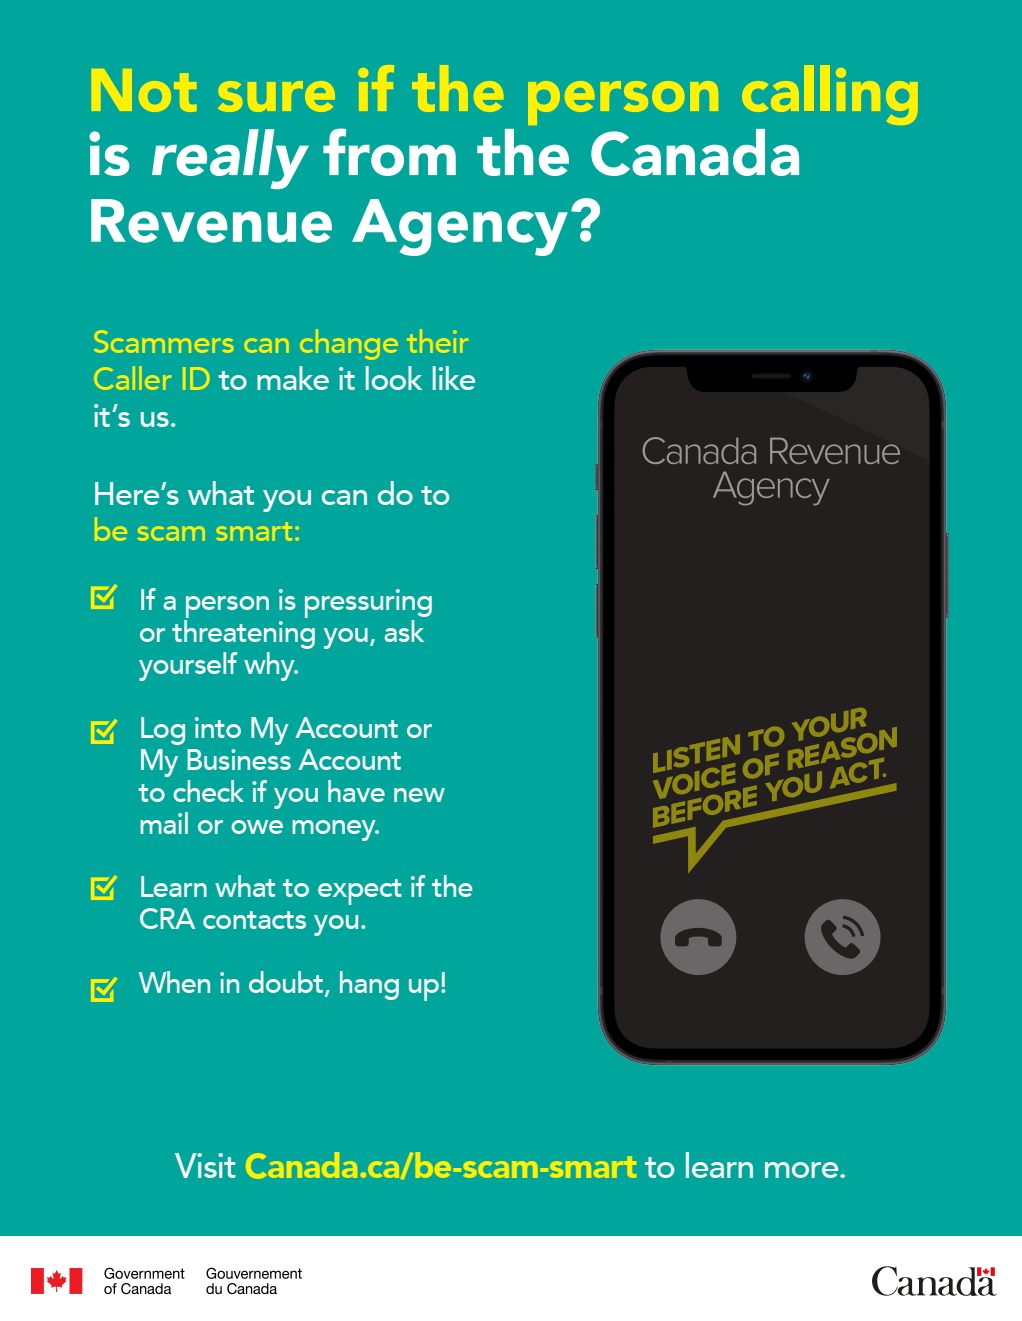 Can The CRA Look At Your Bank Account?